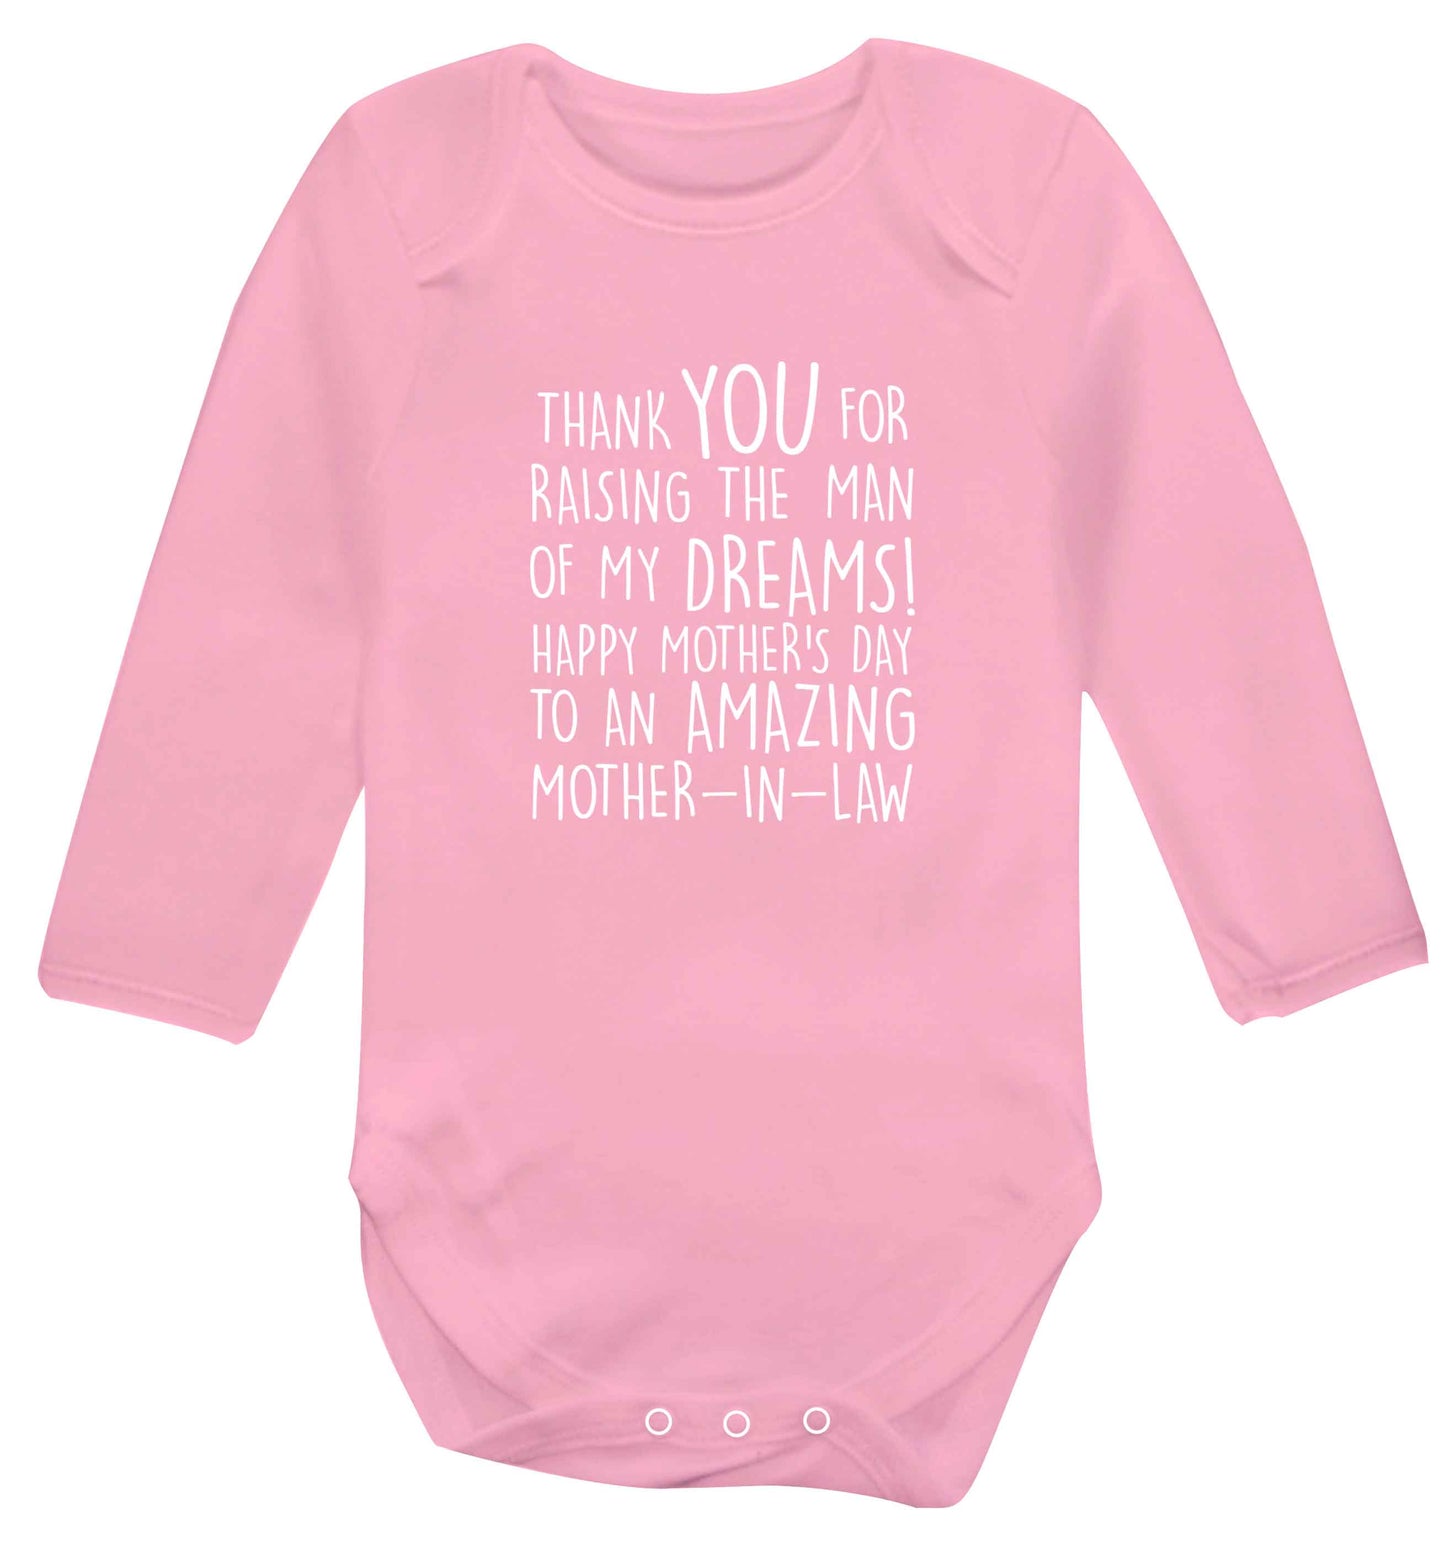 Raising the man of my dreams mother's day mother-in-law baby vest long sleeved pale pink 6-12 months